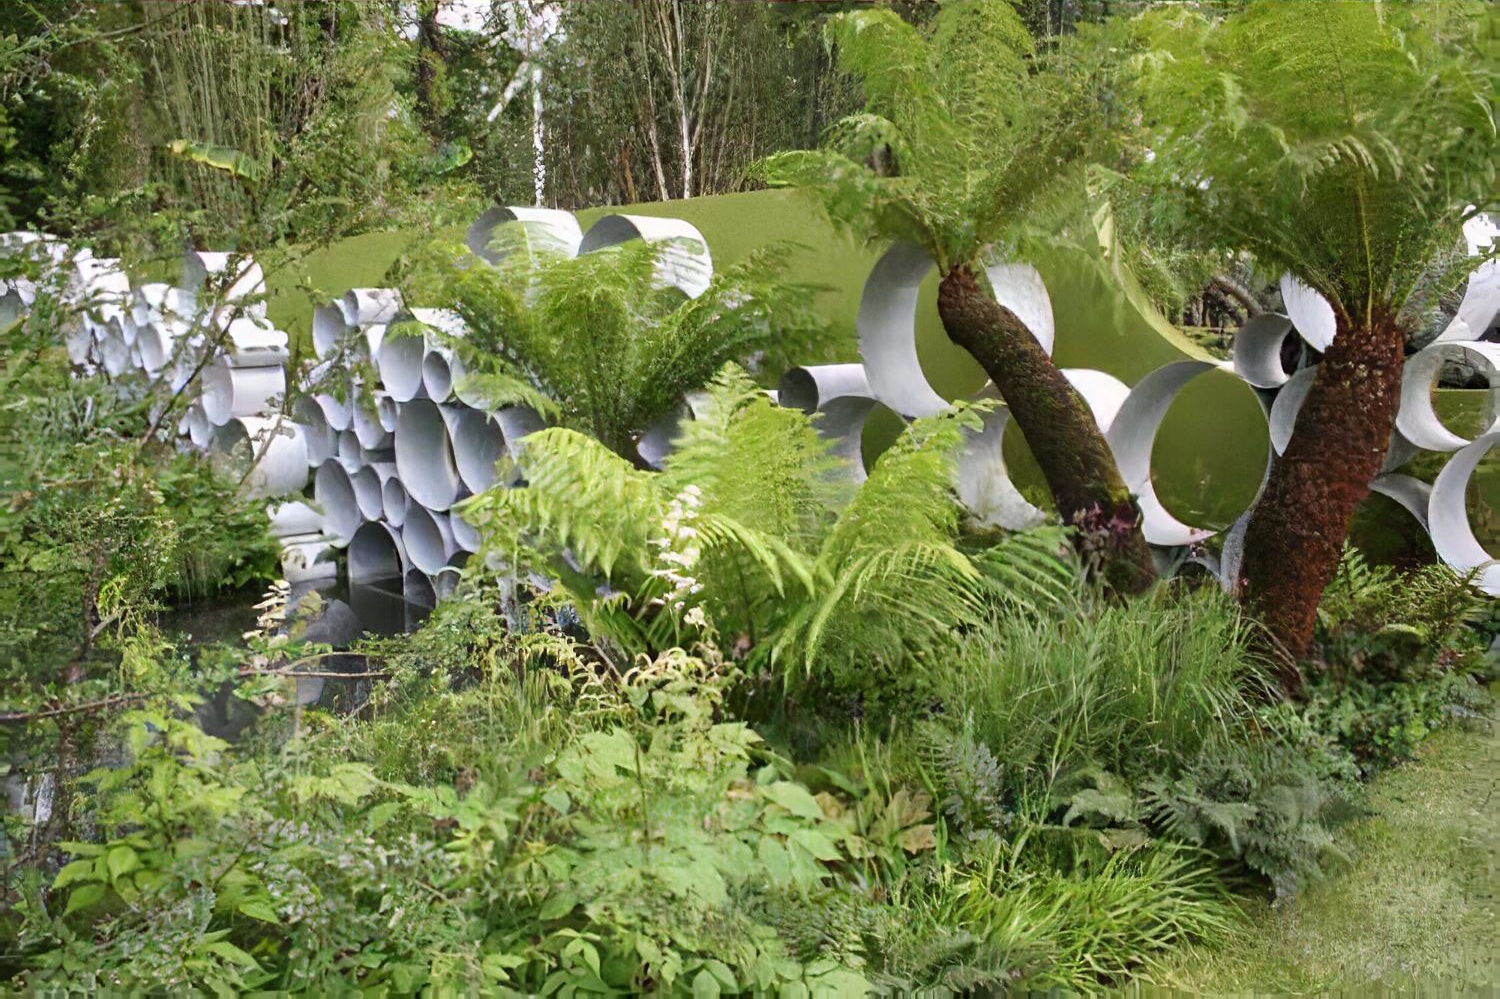 cancer research uk. The Cancer Research UK Garden